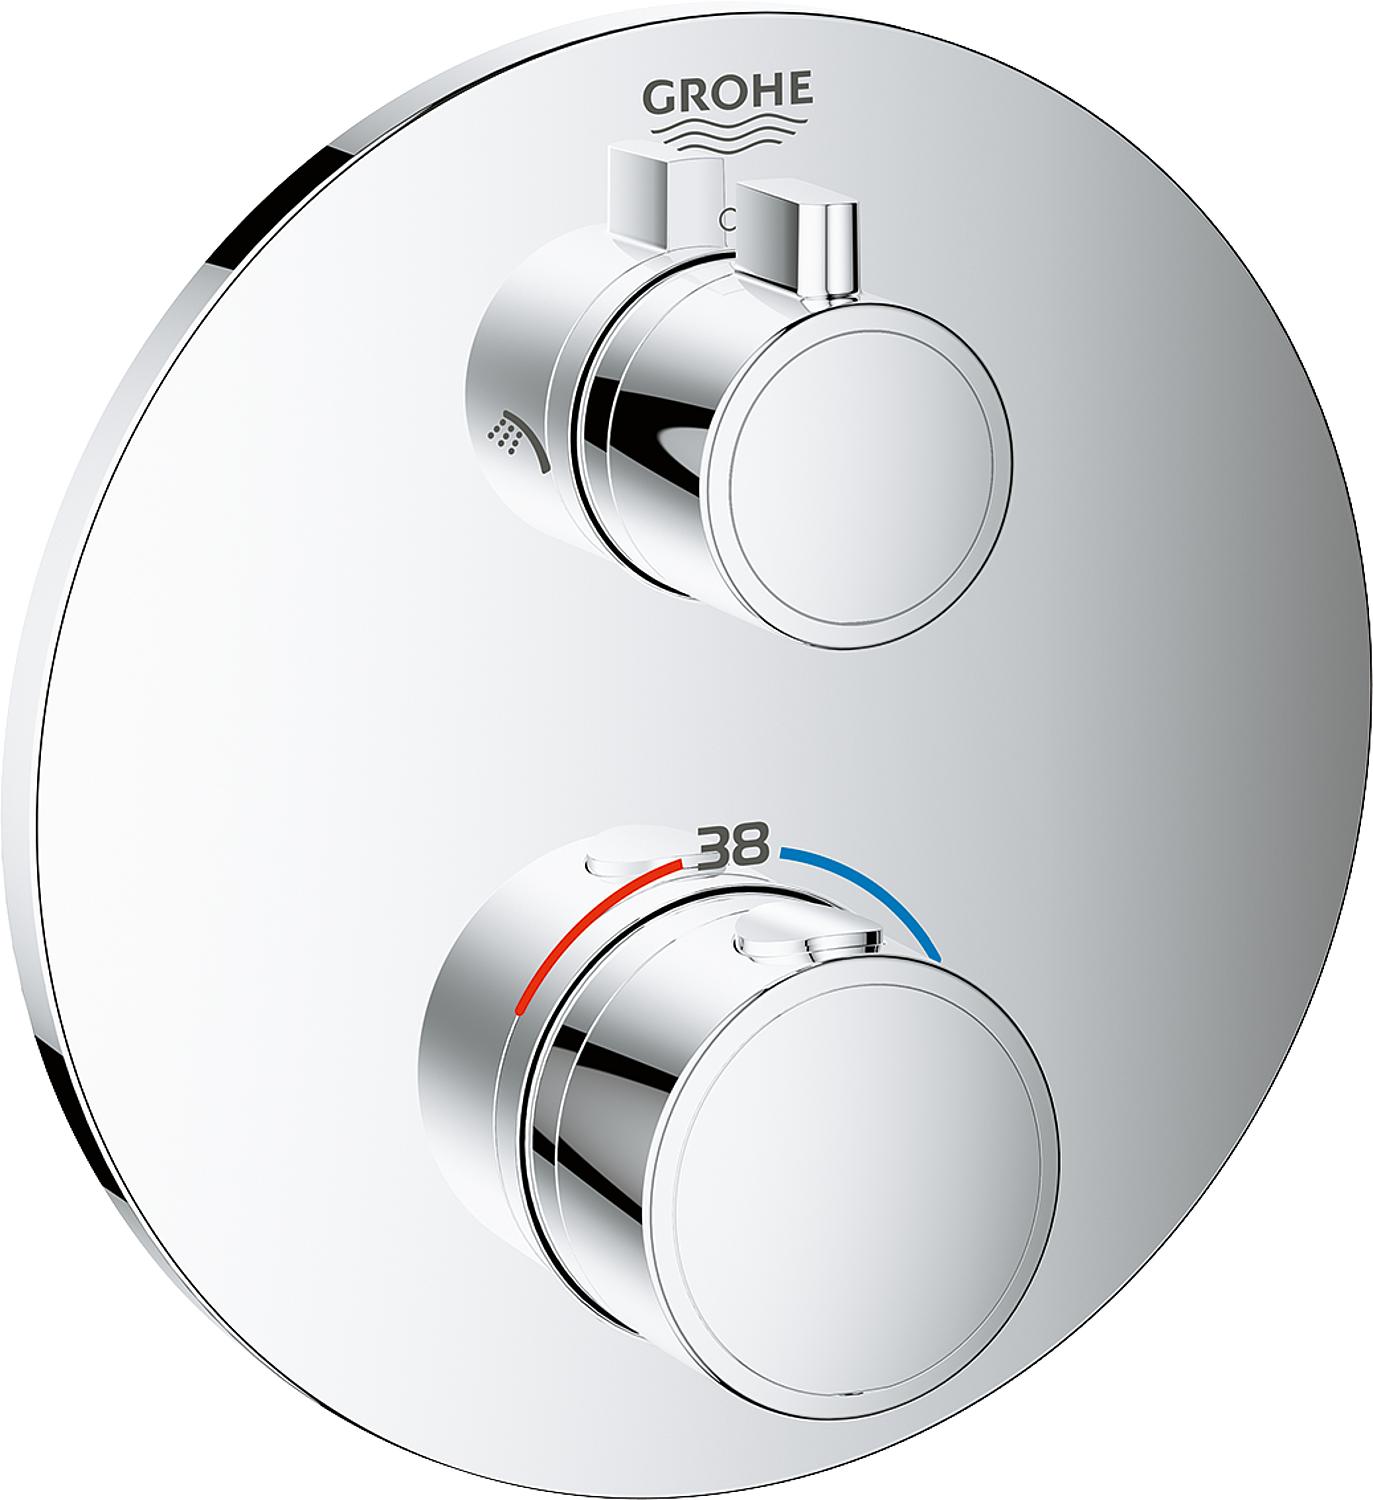 asdec life ® thermostat Grohe Grohtherm shower (round) for 35600, 2-way diverter, chrome